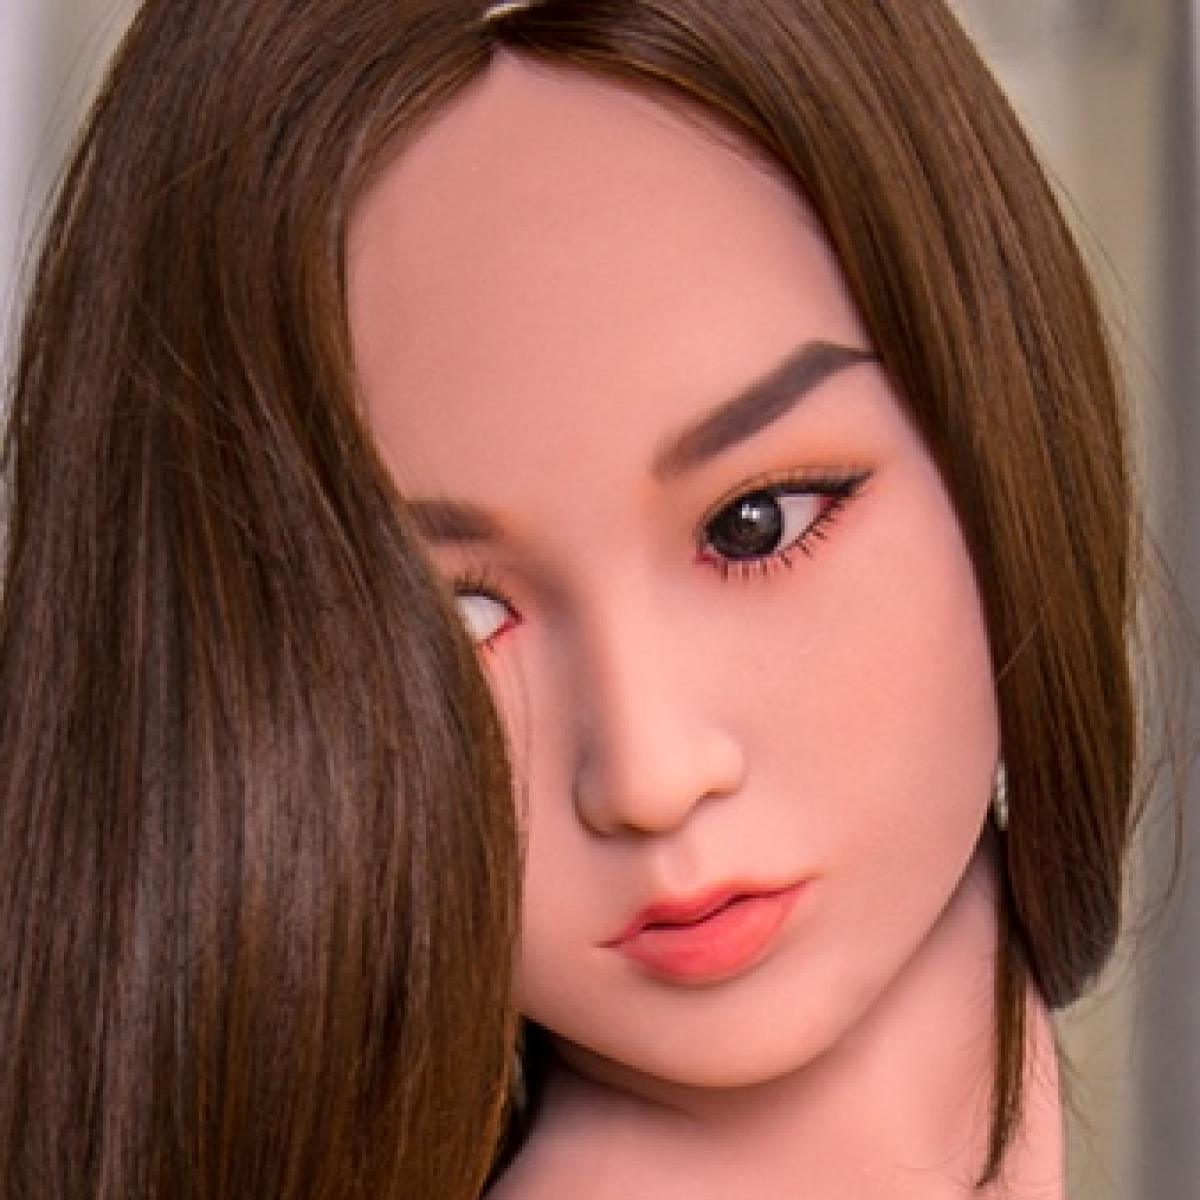 Firedoll - Florence - Sex Doll Head - M16 Compatible - Light Tan - Lucidtoys